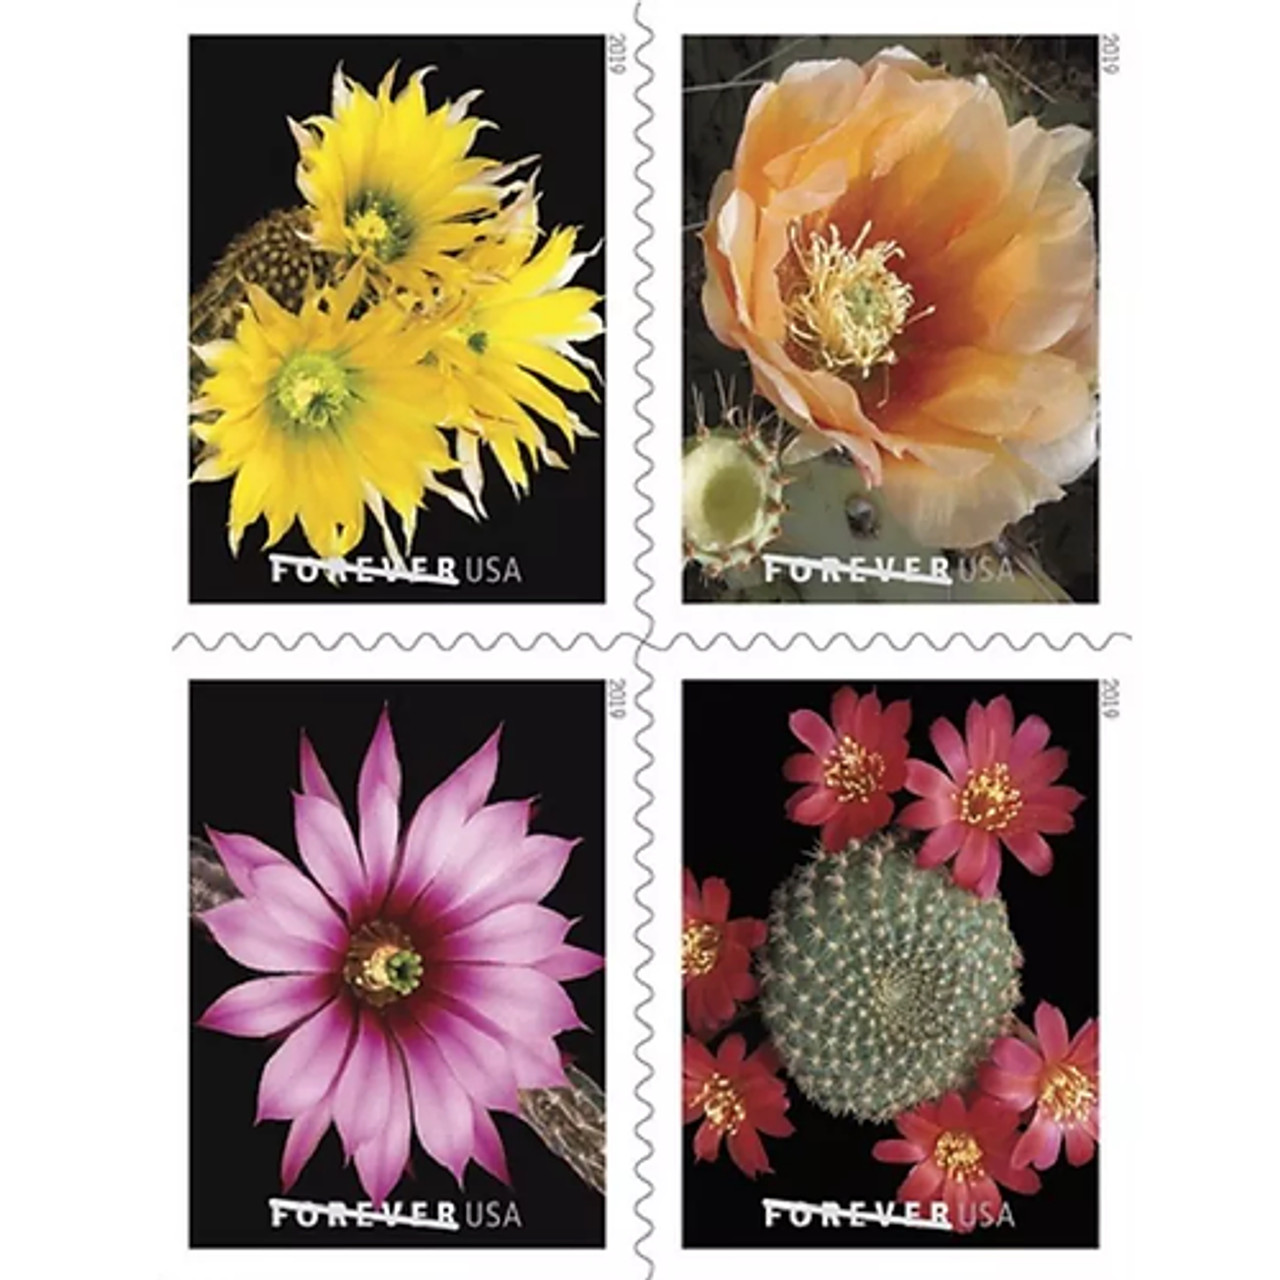 Cactus Flowers 2019, Discounted Forever Stamps